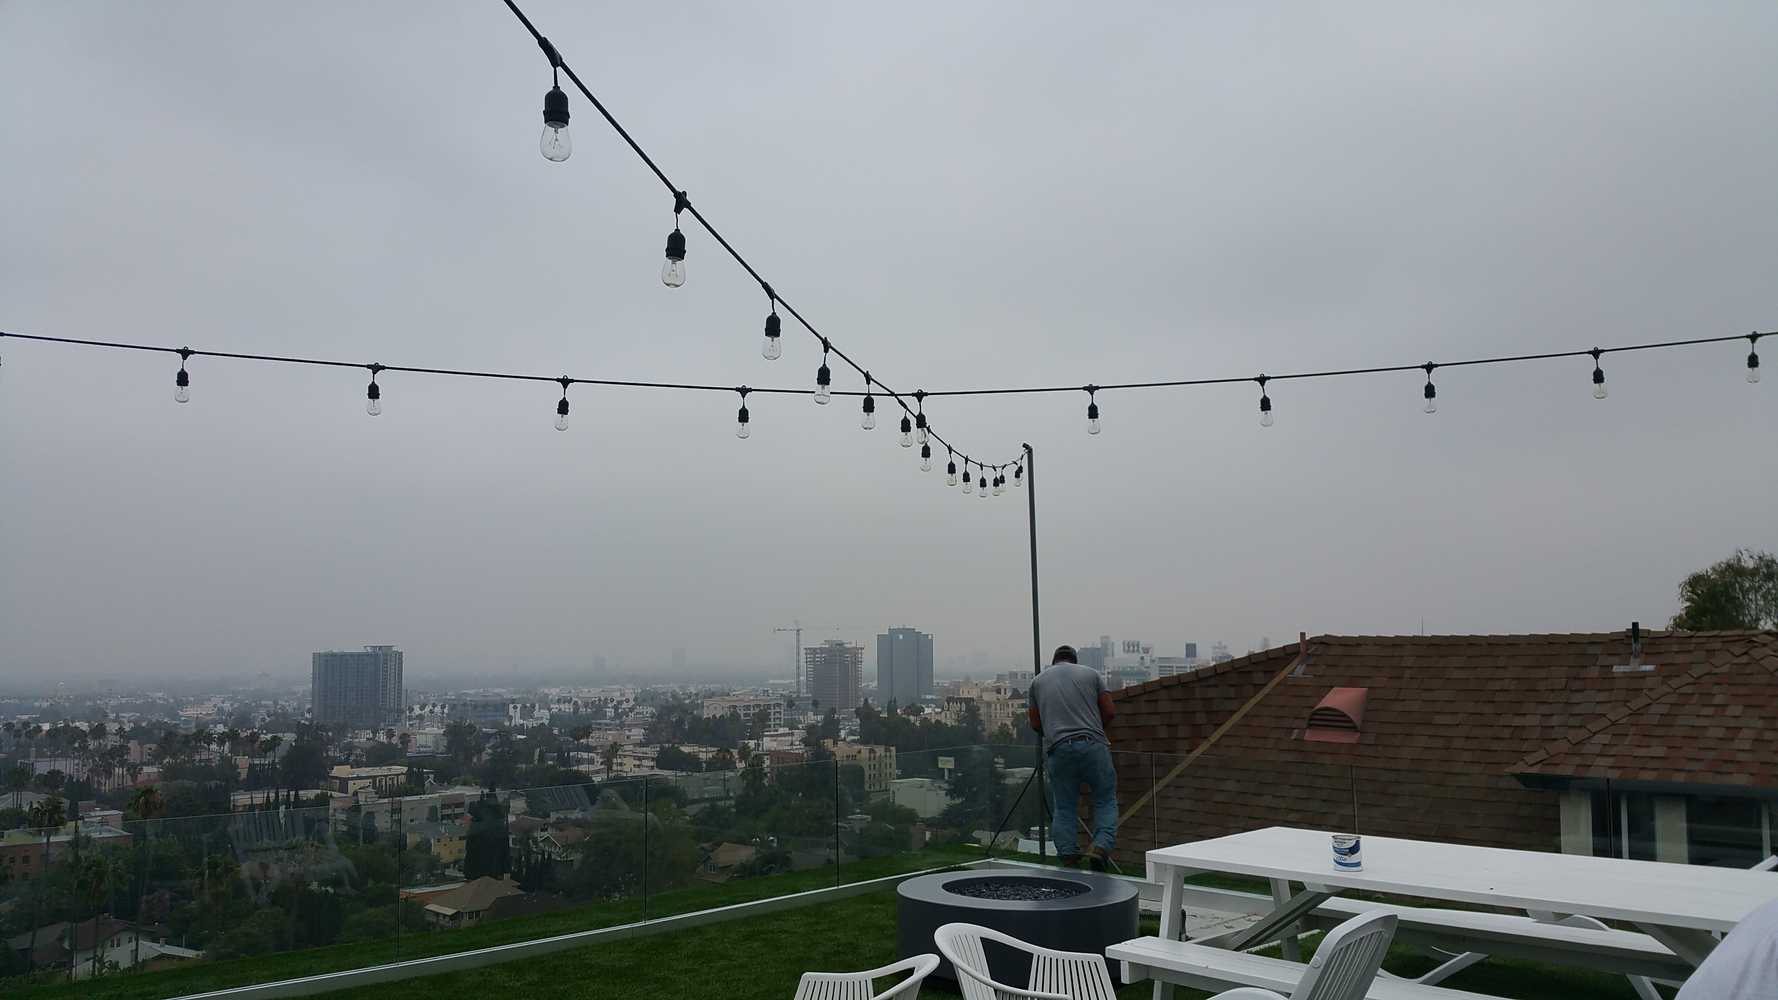 Rooftop Hollywod Hills